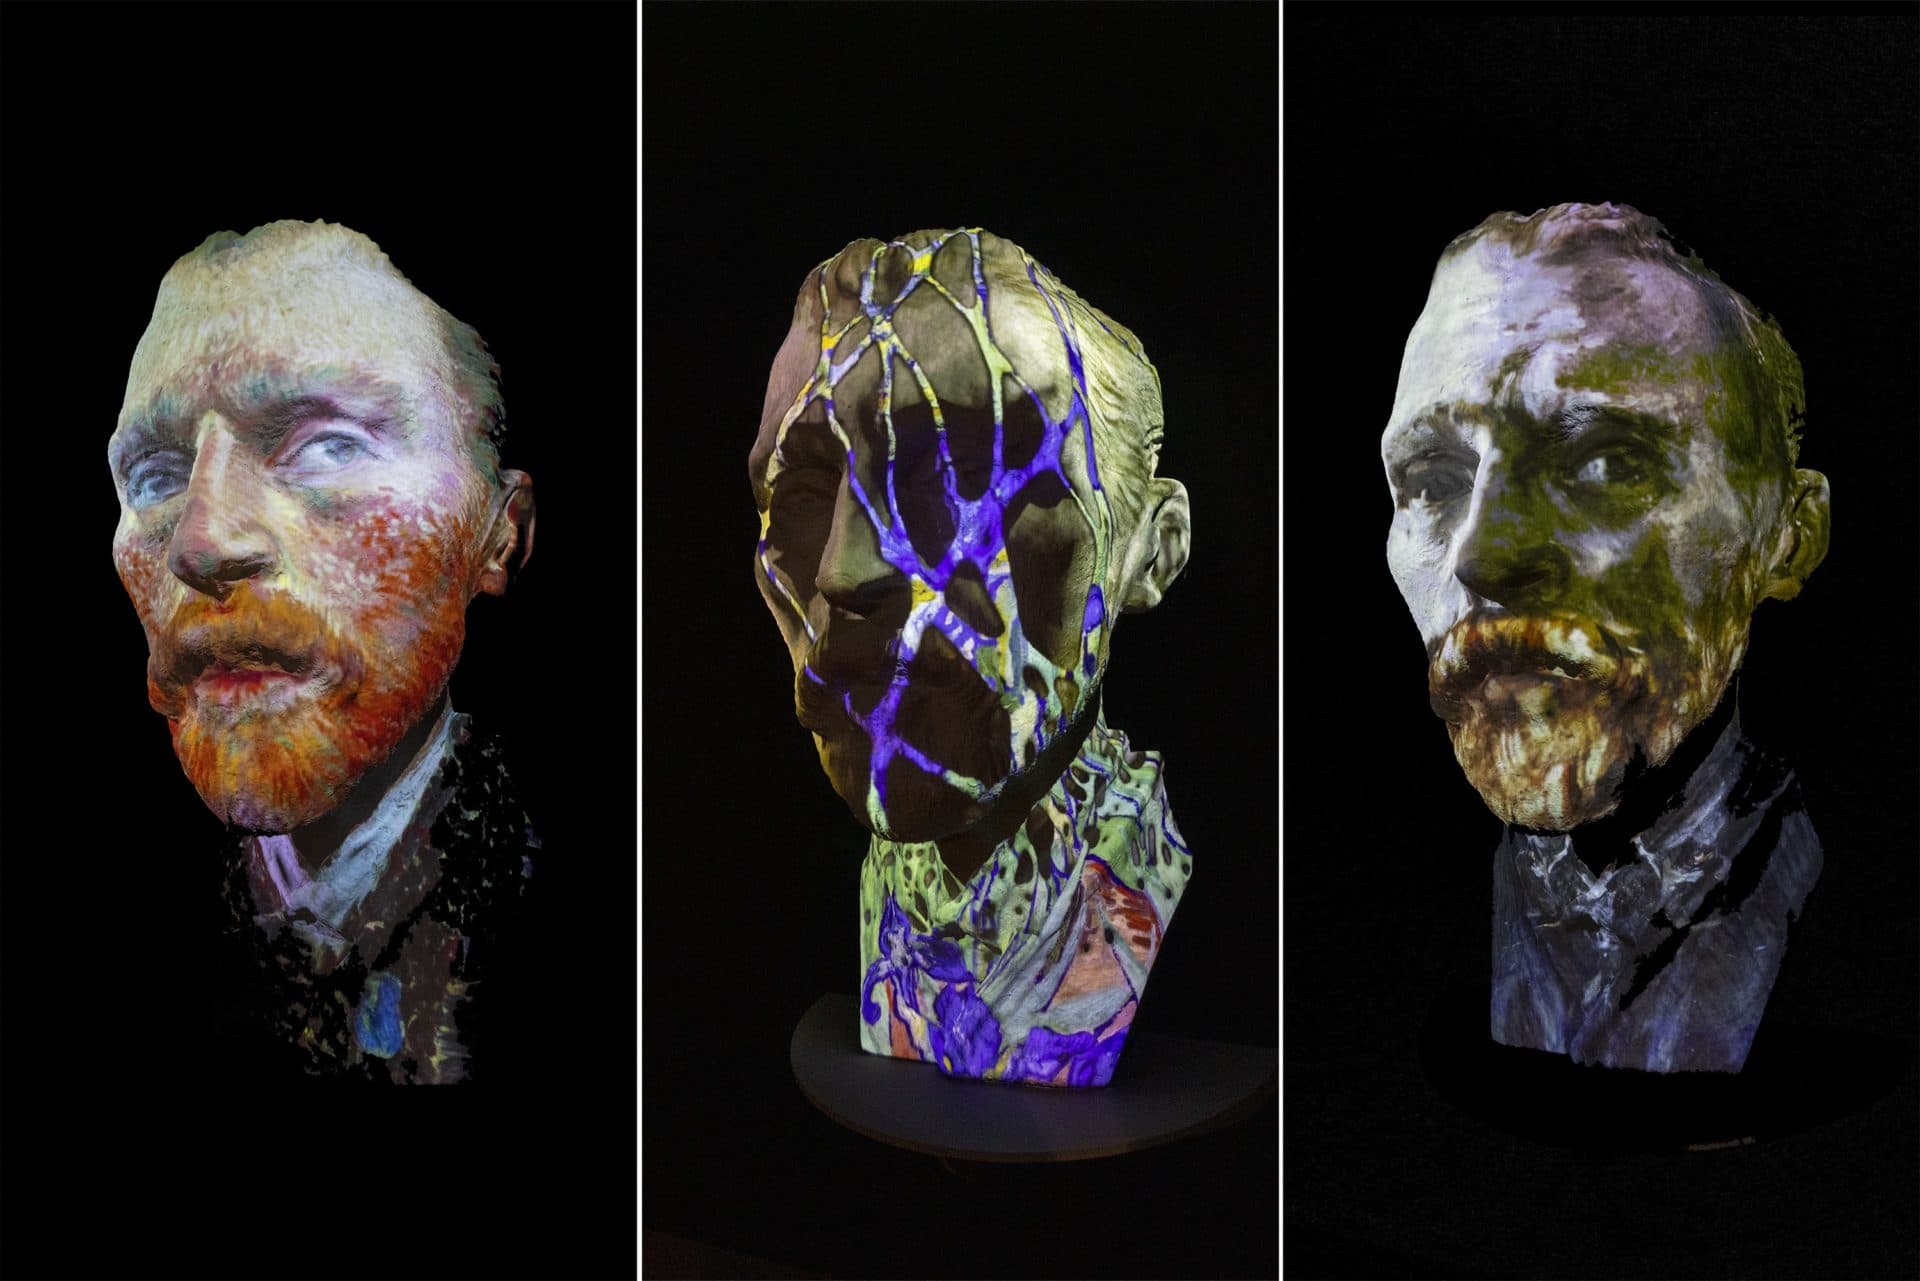 A bust of the Vincent van Gogh, which sits at the entrance of the exhibit, goes through a transformation using various light projections. (Jesse Costa/WBUR)